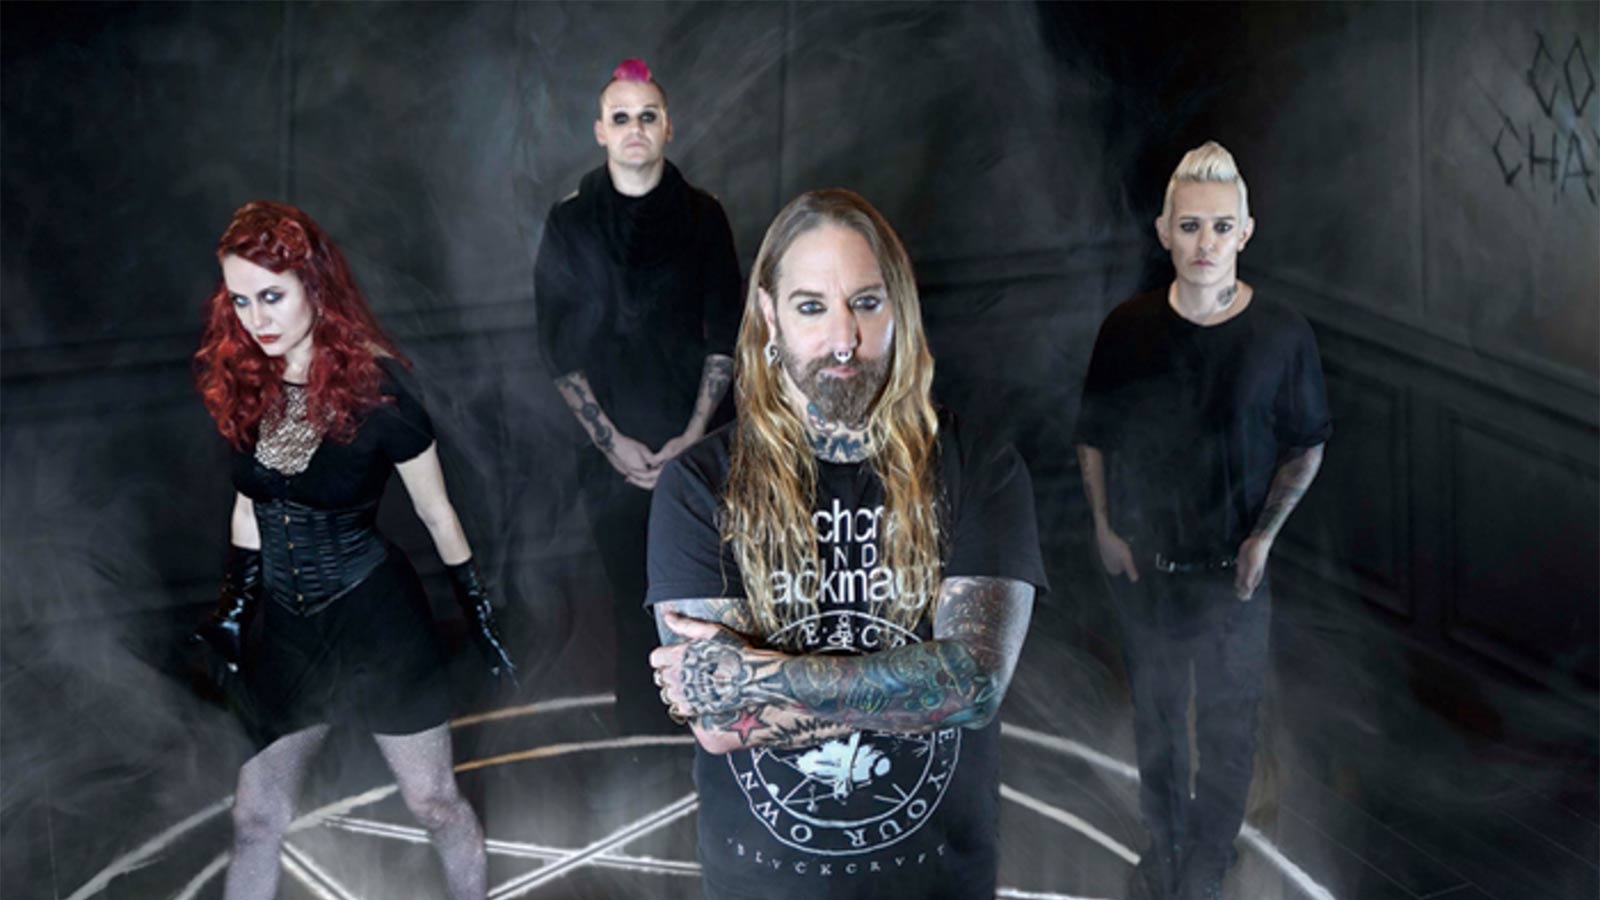 COAL CHAMBER reunited due to DEZ FAFARA nearly dying from COVID Revolver